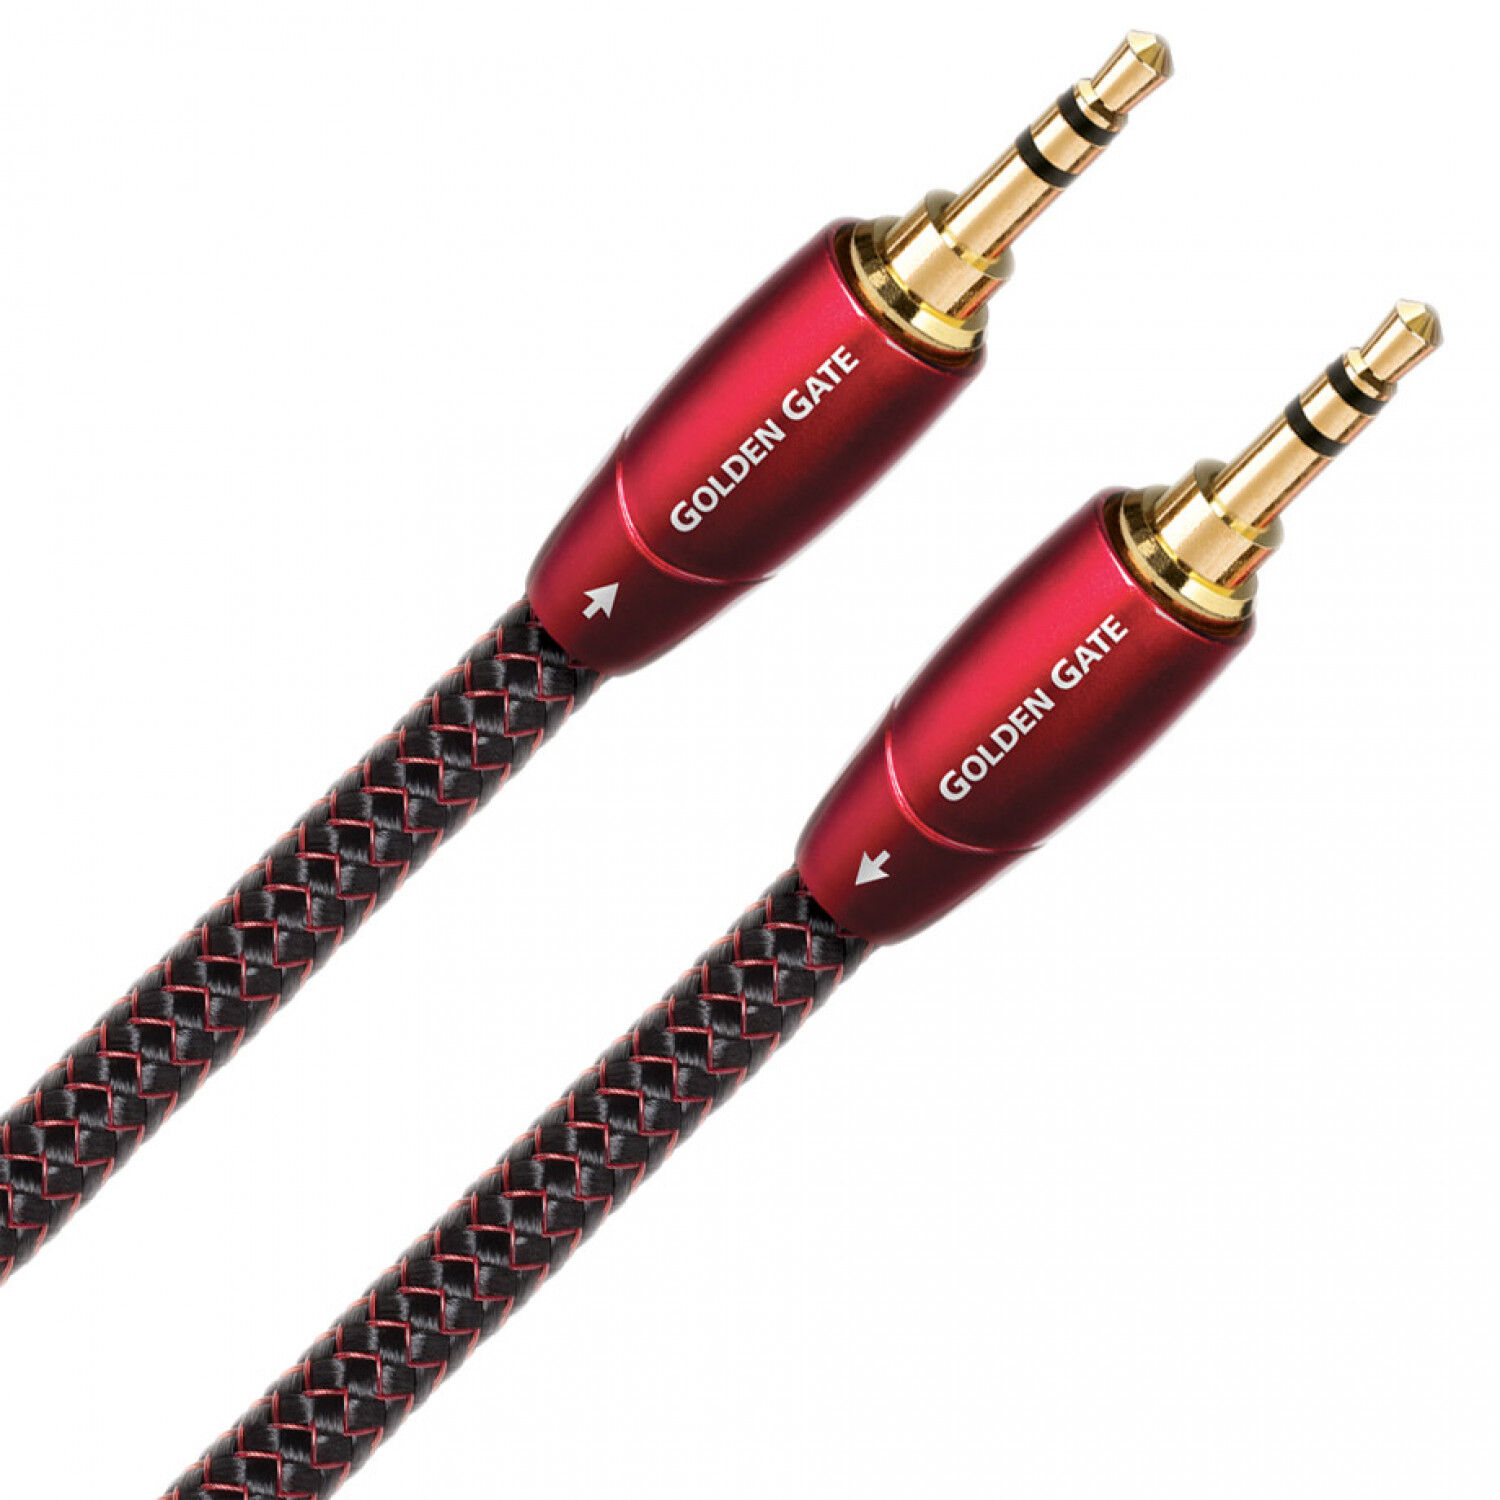 Audioquest Golden Gate - 3.5mm to 3.5mm Cable - 1m